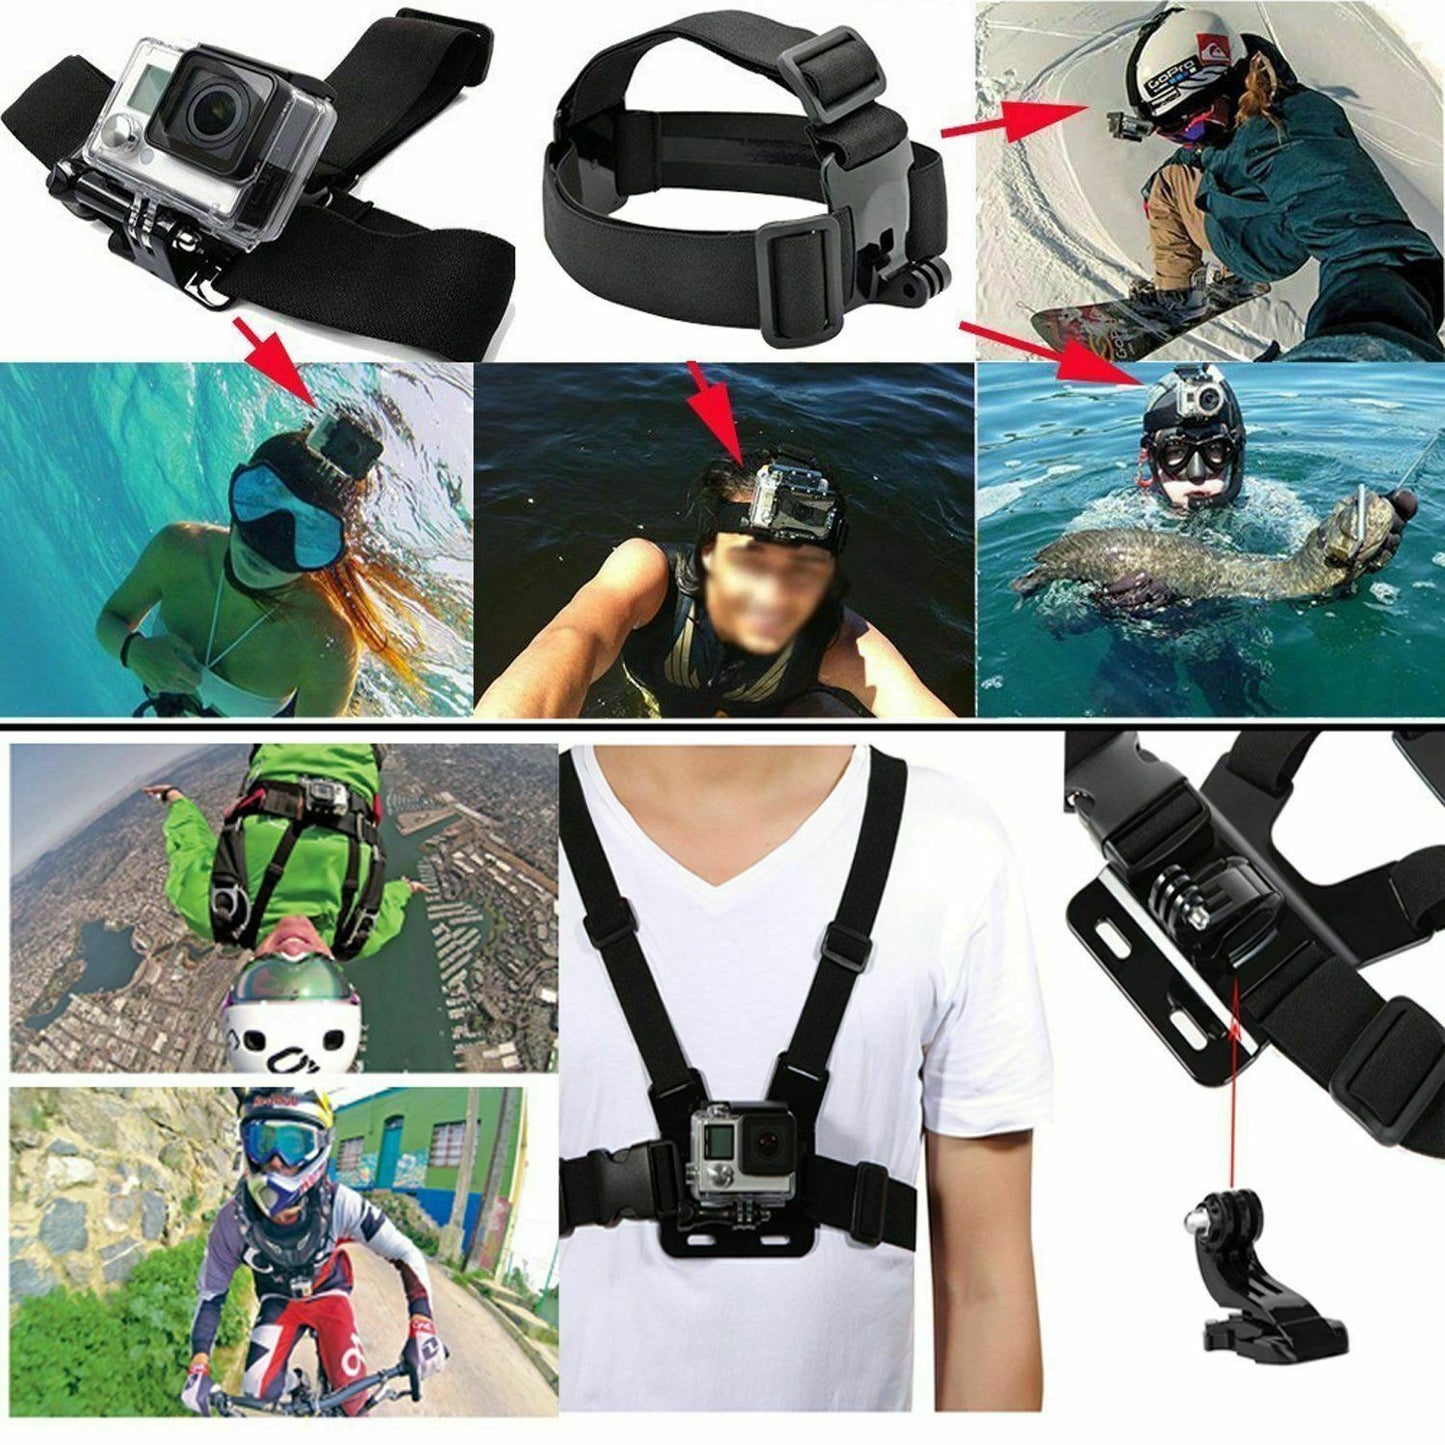 216 pcs Accessories Pack Case Chest Head Floating Monopod GoPro Hero 8 7 6 5 4